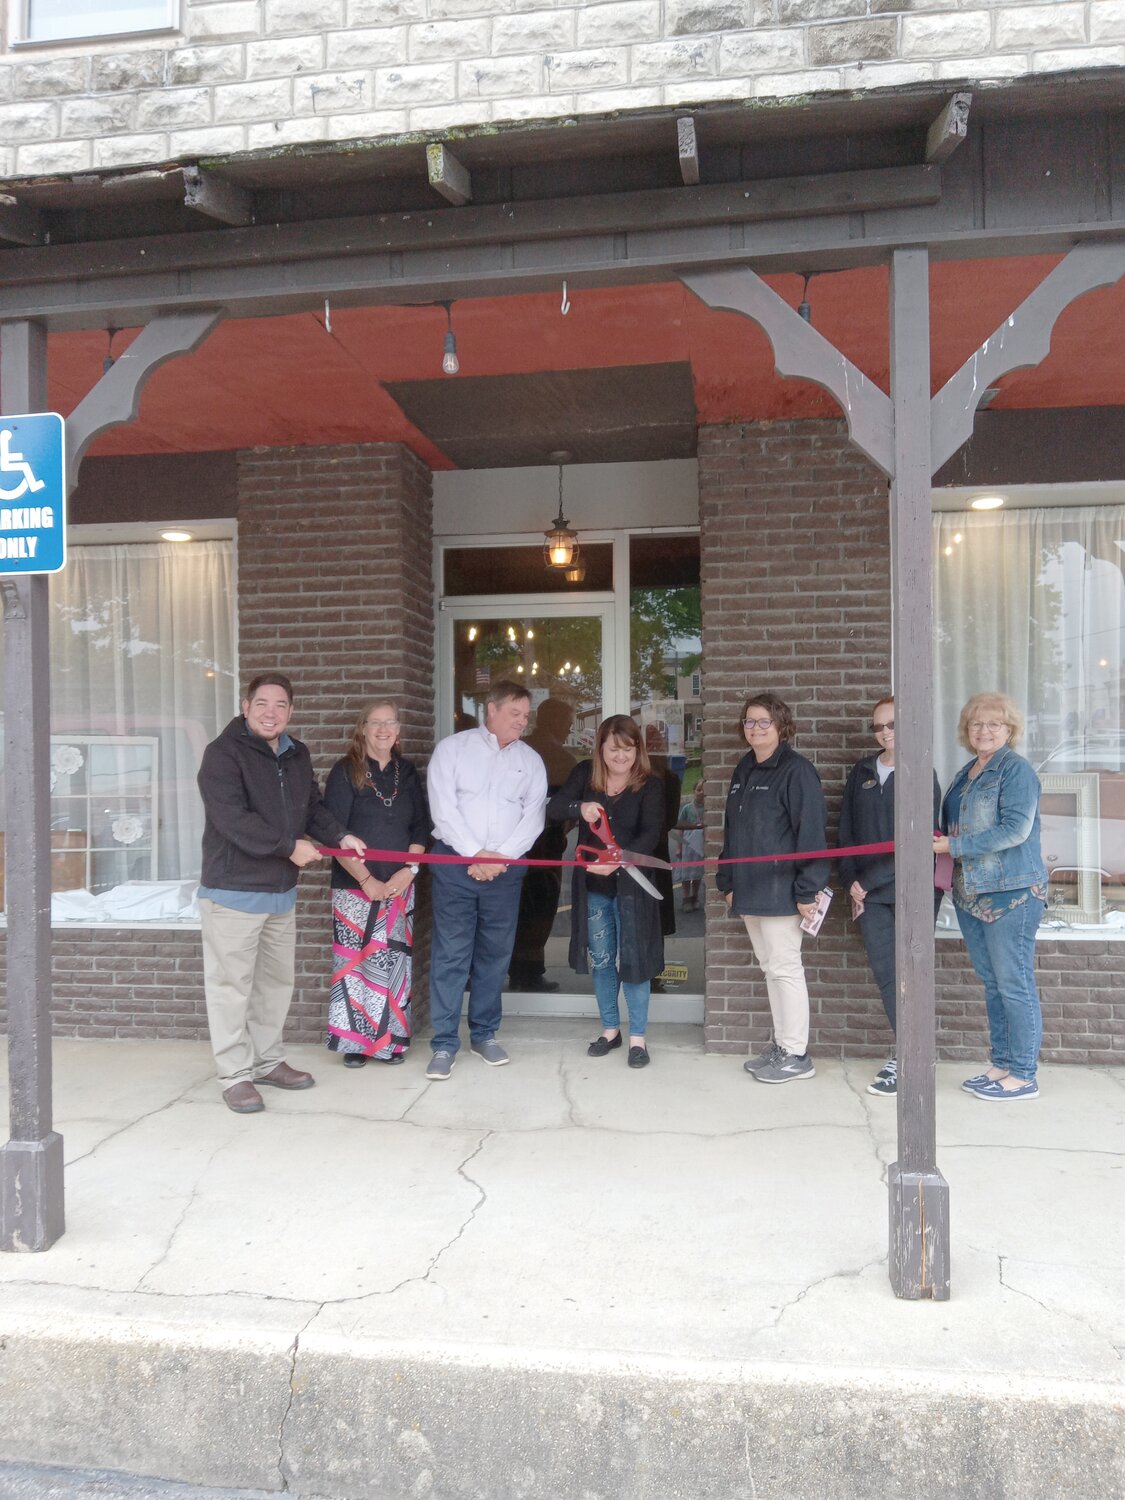 The Mansfield Area Chamber of Commerce held an official ribbon cutting ceremony at Venue at Park Square in front of their location on Friday, May 5. Leigh Ann Cassell cut the ribbon as she was joined by Chamber members for the ceremony. The business is located at 103 W. Park Square in Mansfield.